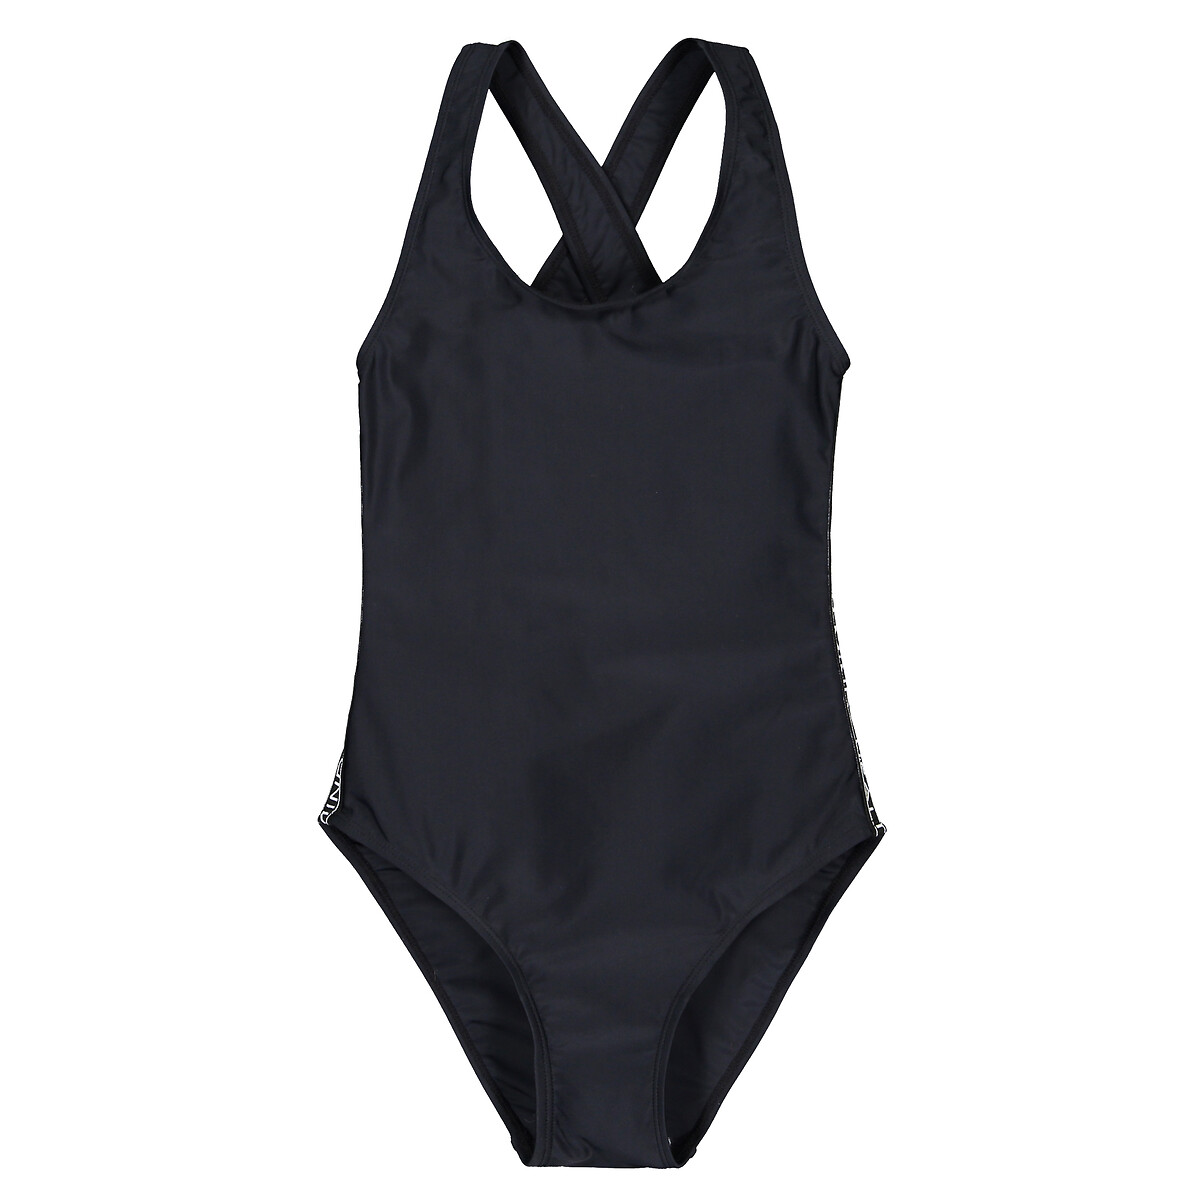 Swimsuit, 10-18 years, black, La Redoute Collections | La Redoute